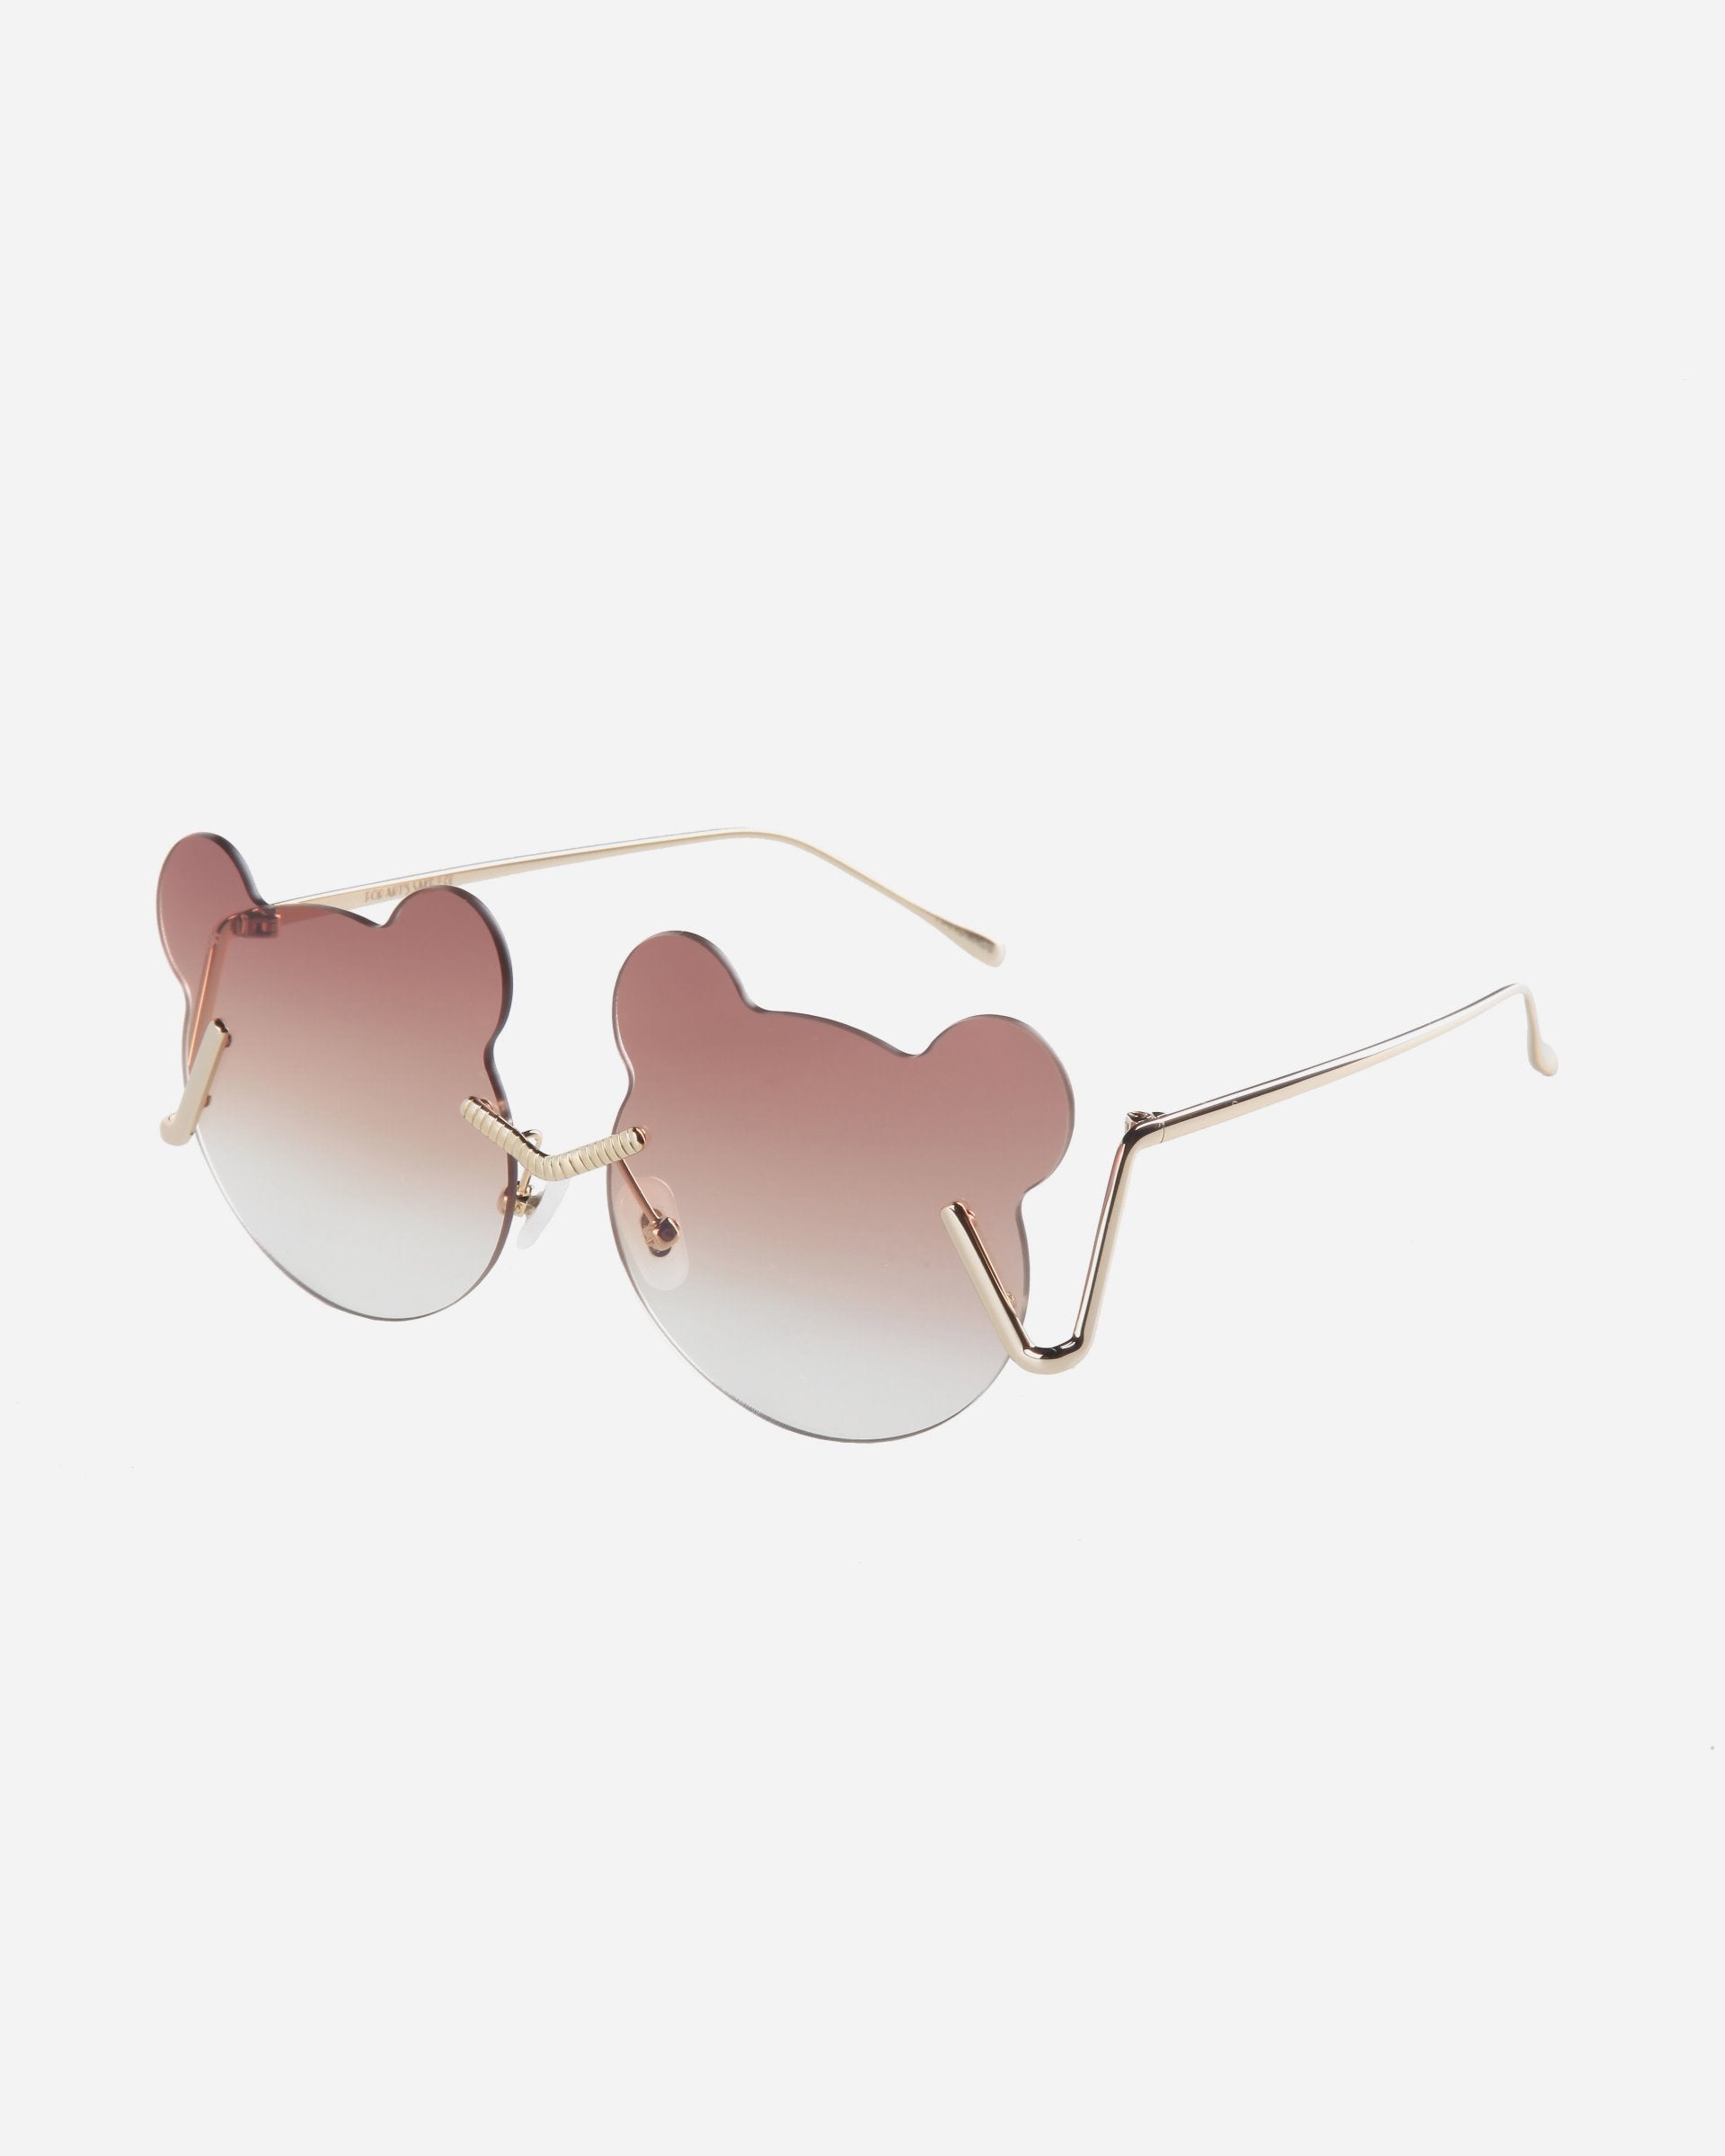 Stylish sunglasses with unique bear-head-shaped lenses featuring a gradient tint from pink to clear and thin, gold-colored stainless steel frames. The ear pieces have a subtle zigzag design near the hinges, and adjustable nosepads ensure comfort. Plus, they offer UV protection for your eyes. The Teddy by For Art&#39;s Sake® offers both style and functionality for your eyewear needs.